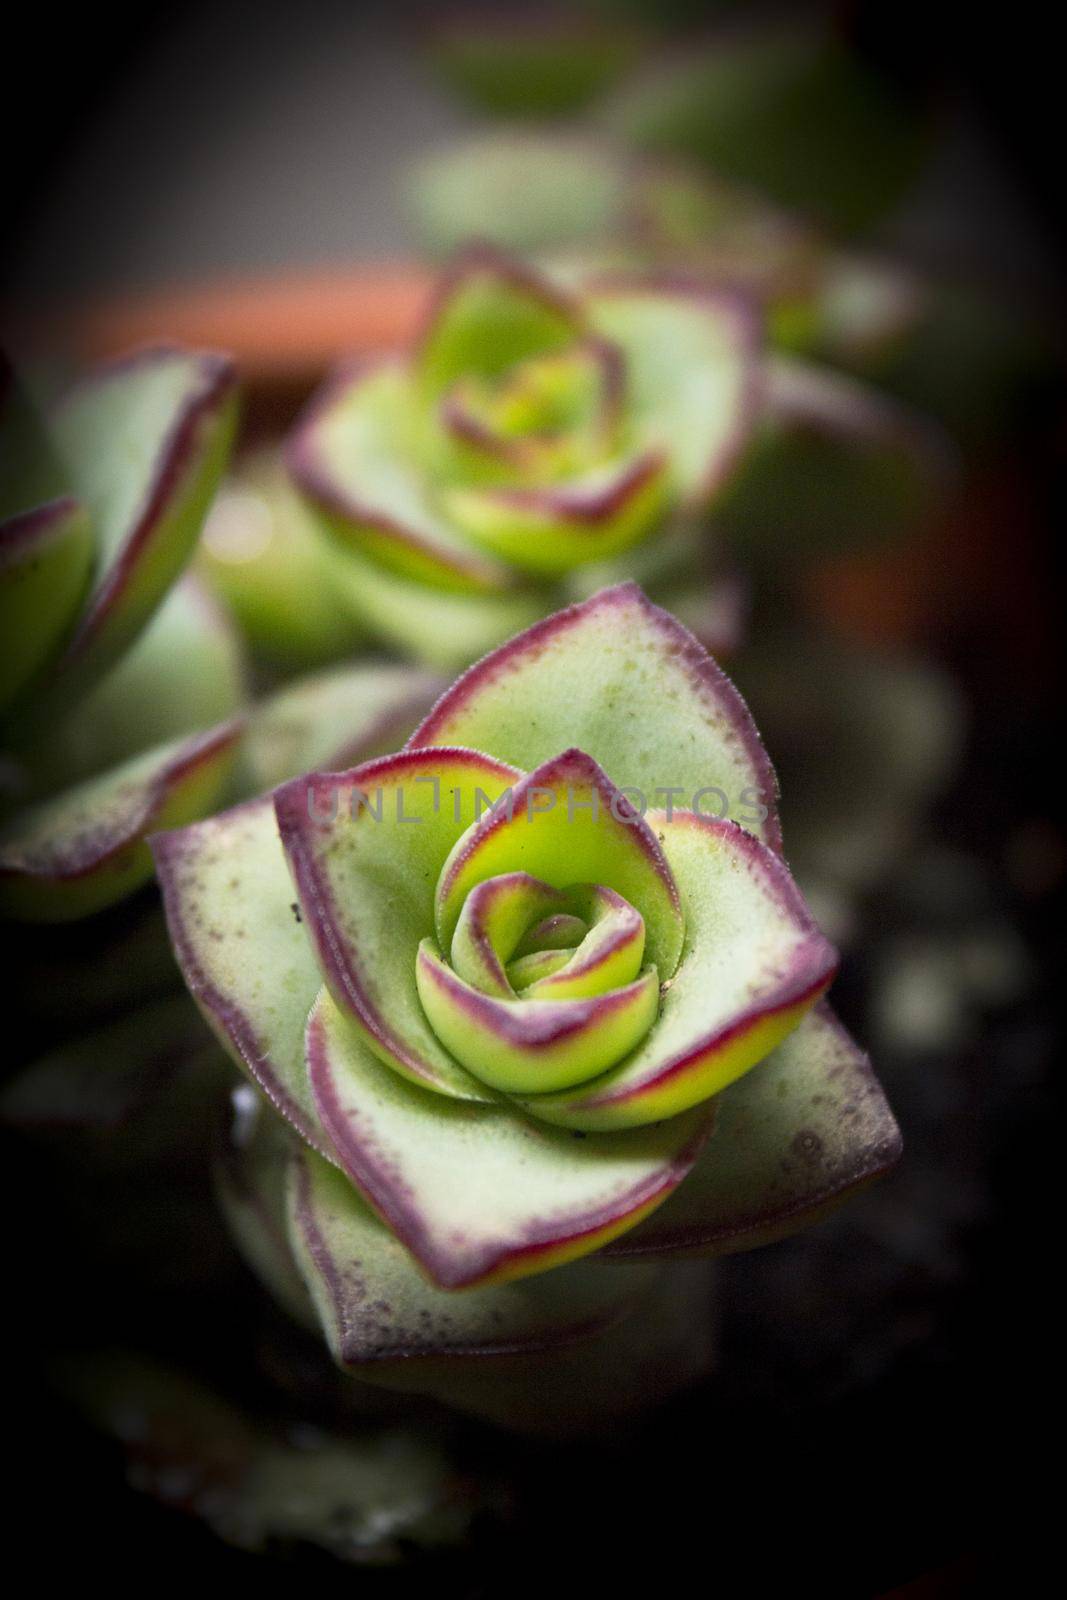 Succulent plant with rose shaped ramifications. Green an red color